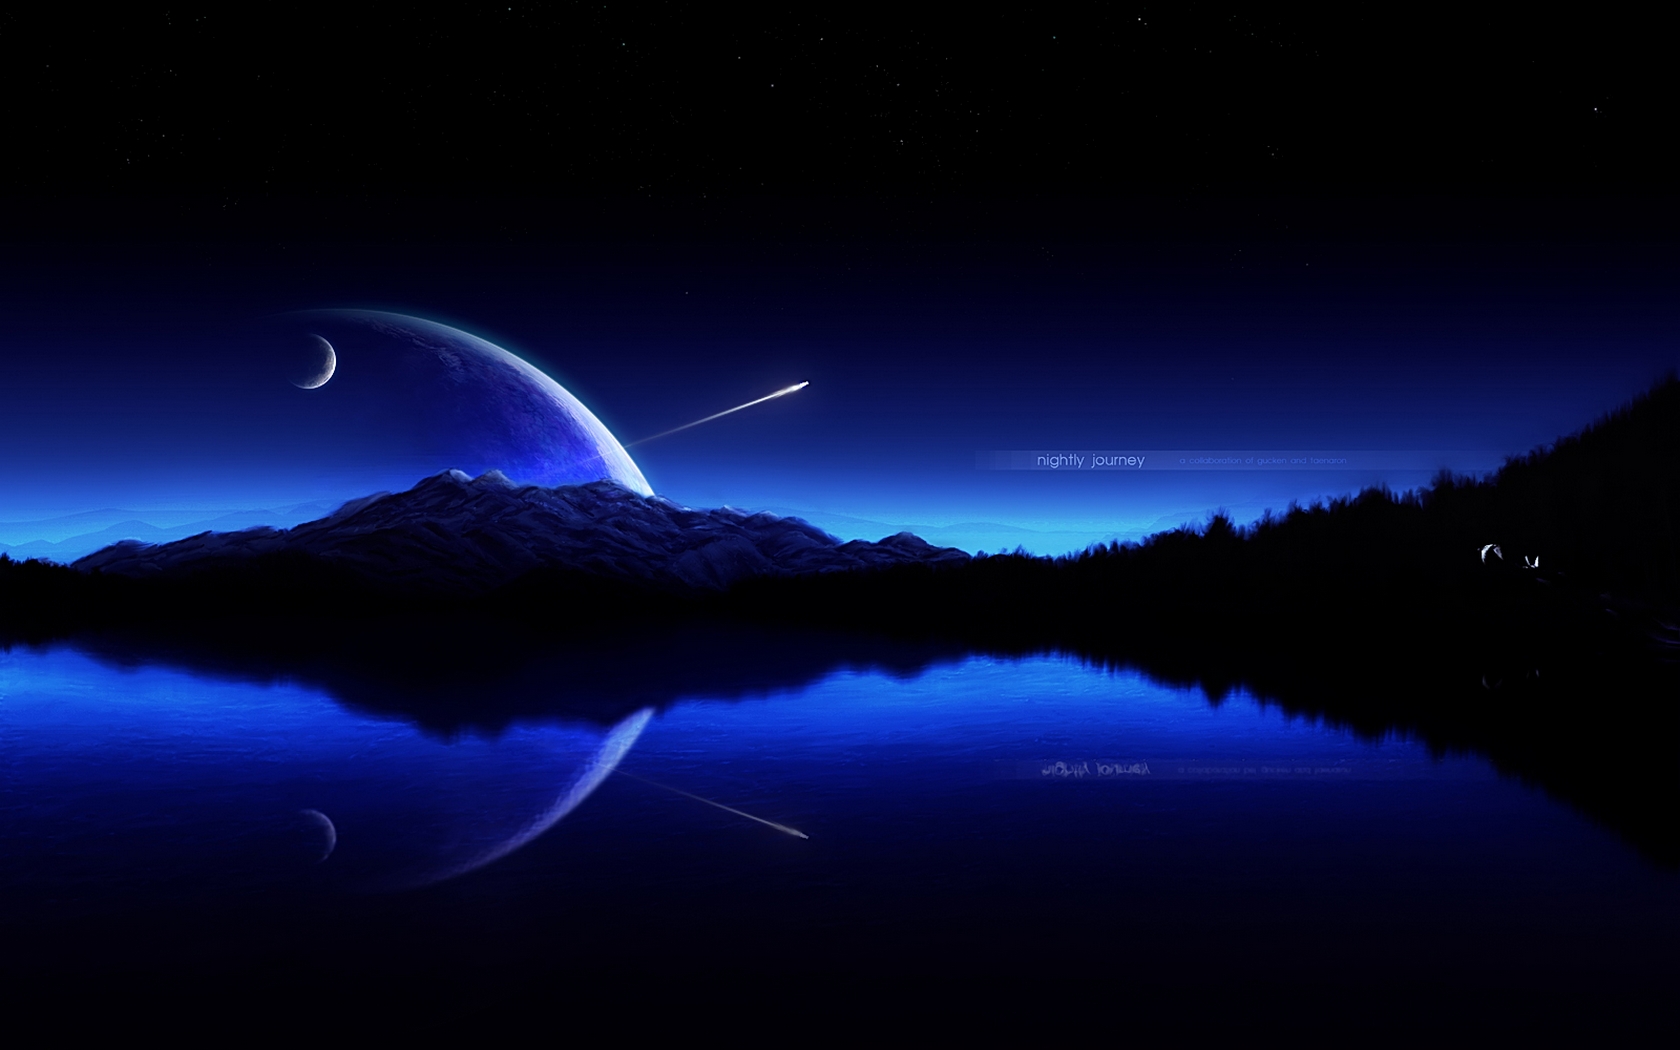 Download High quality Nightly Journey 3d Landscape wallpaper / 1680x1050